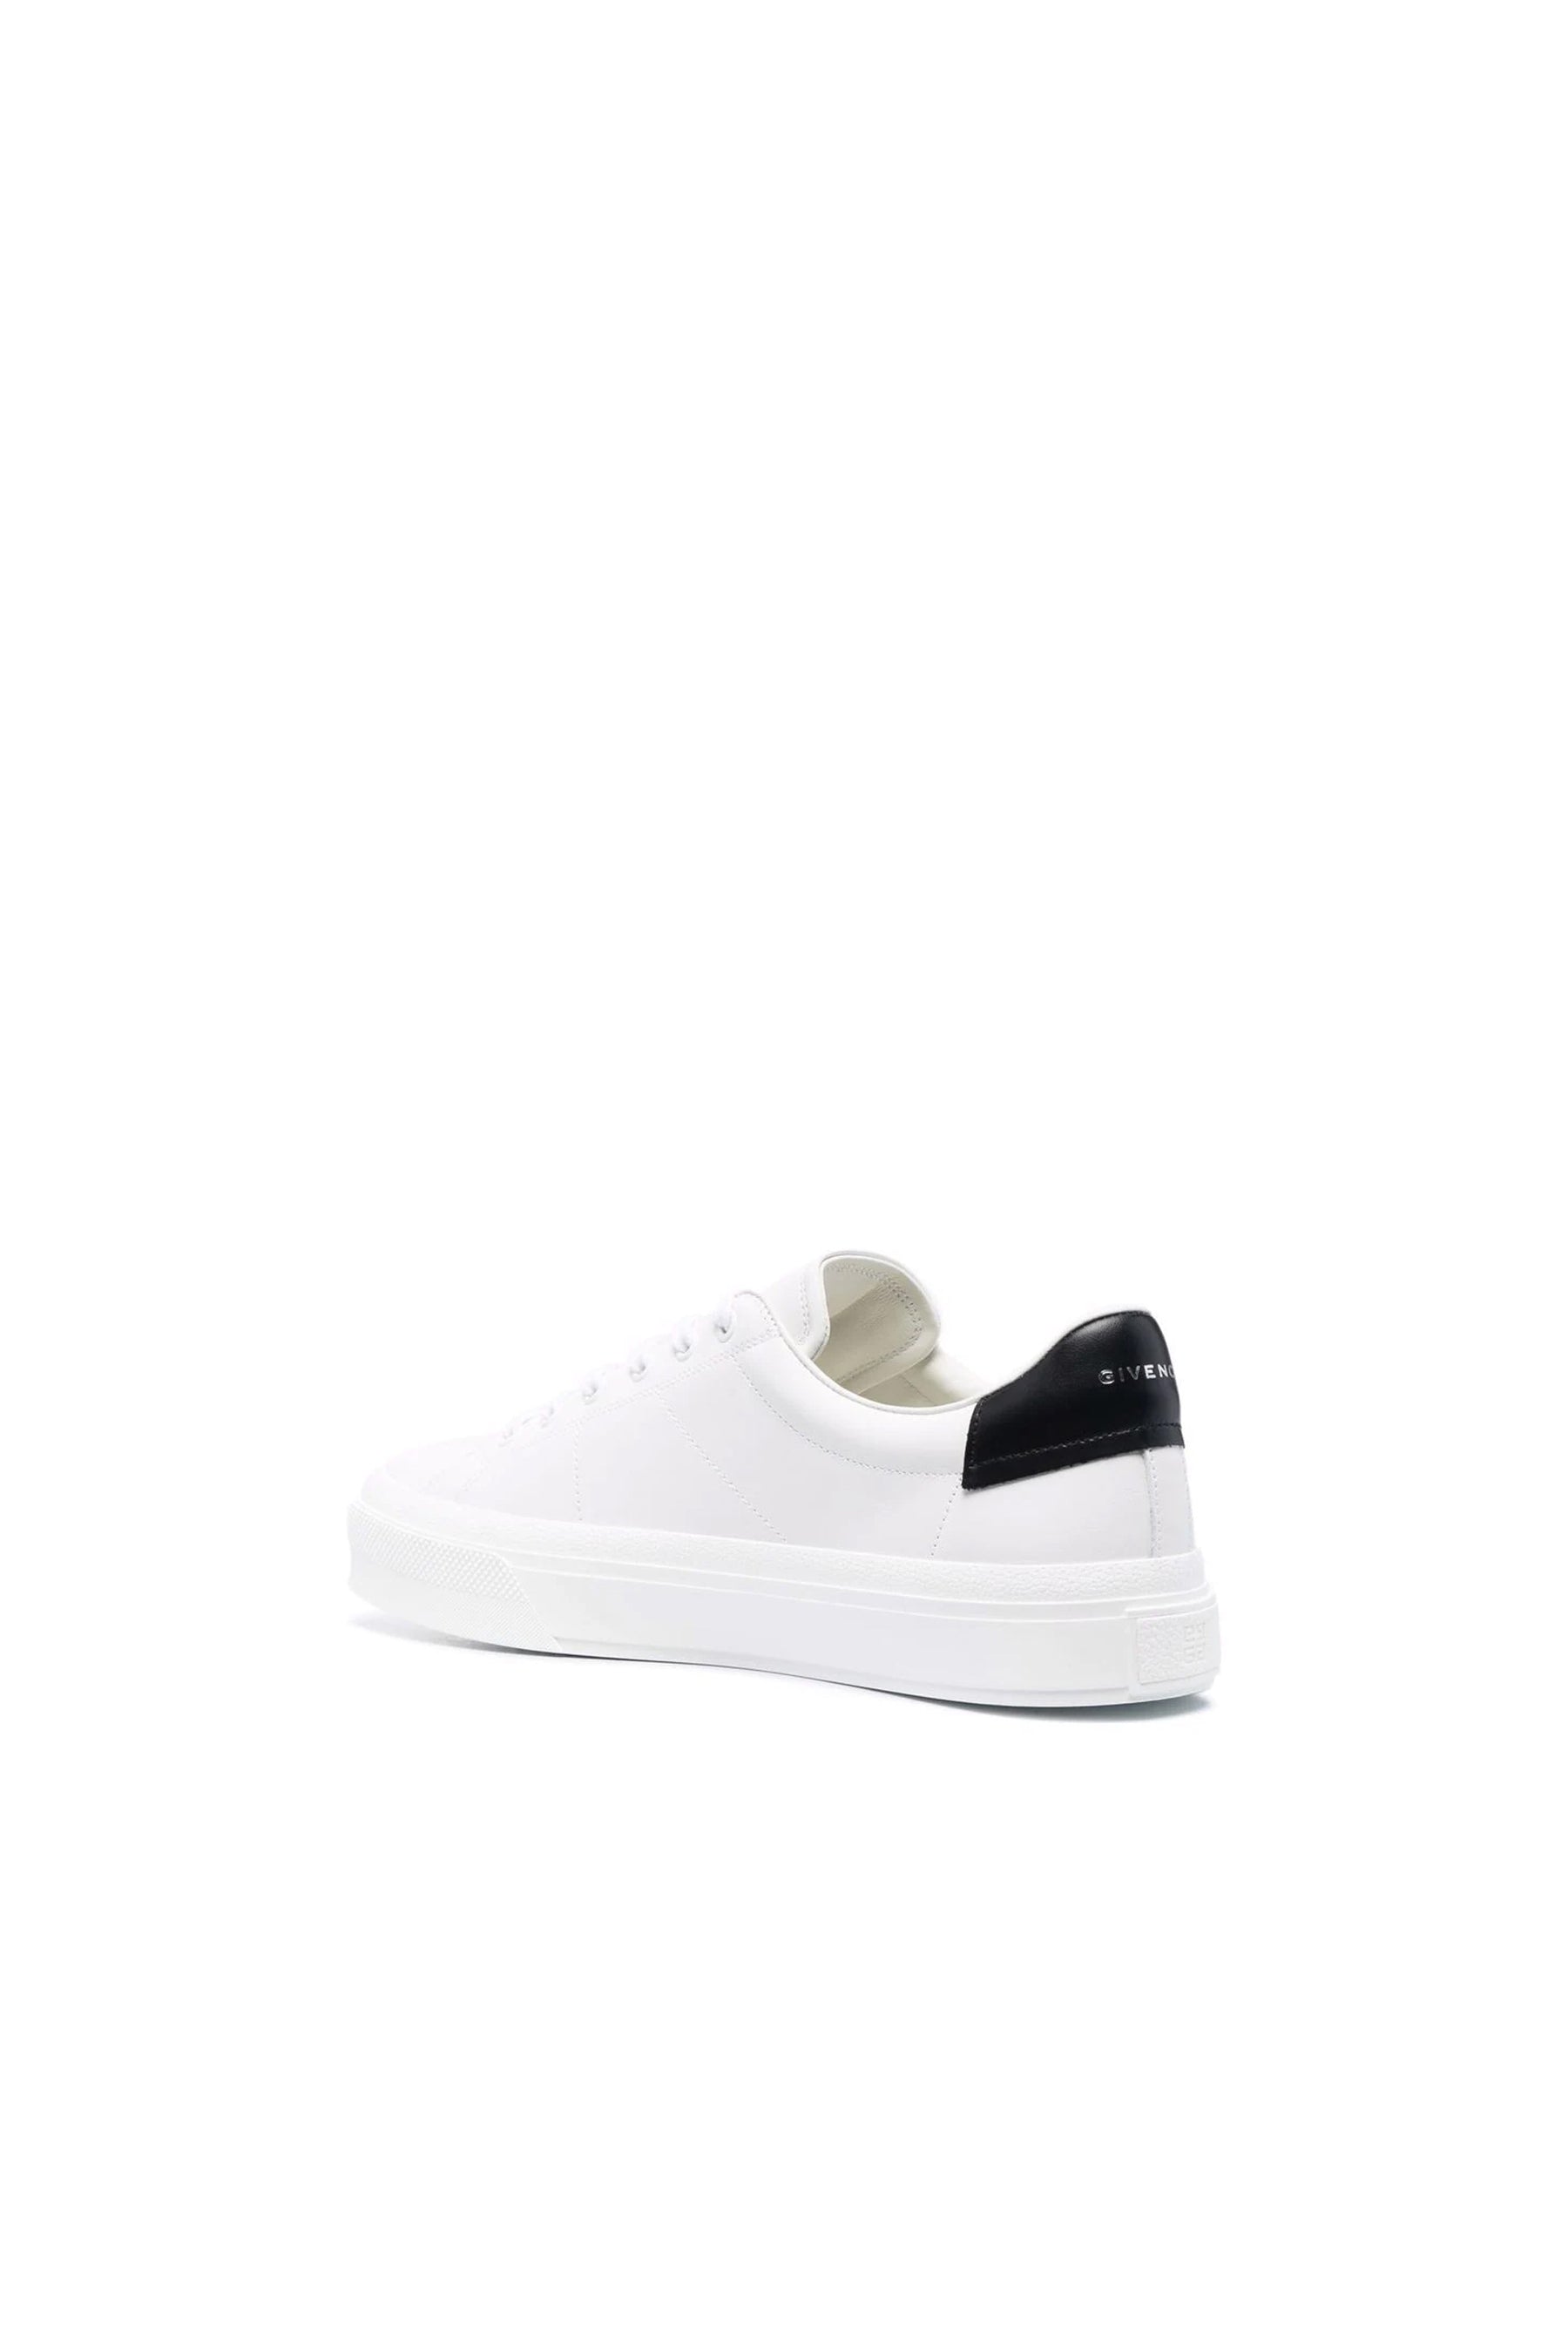 Givenchy City Court lace-up sneakers